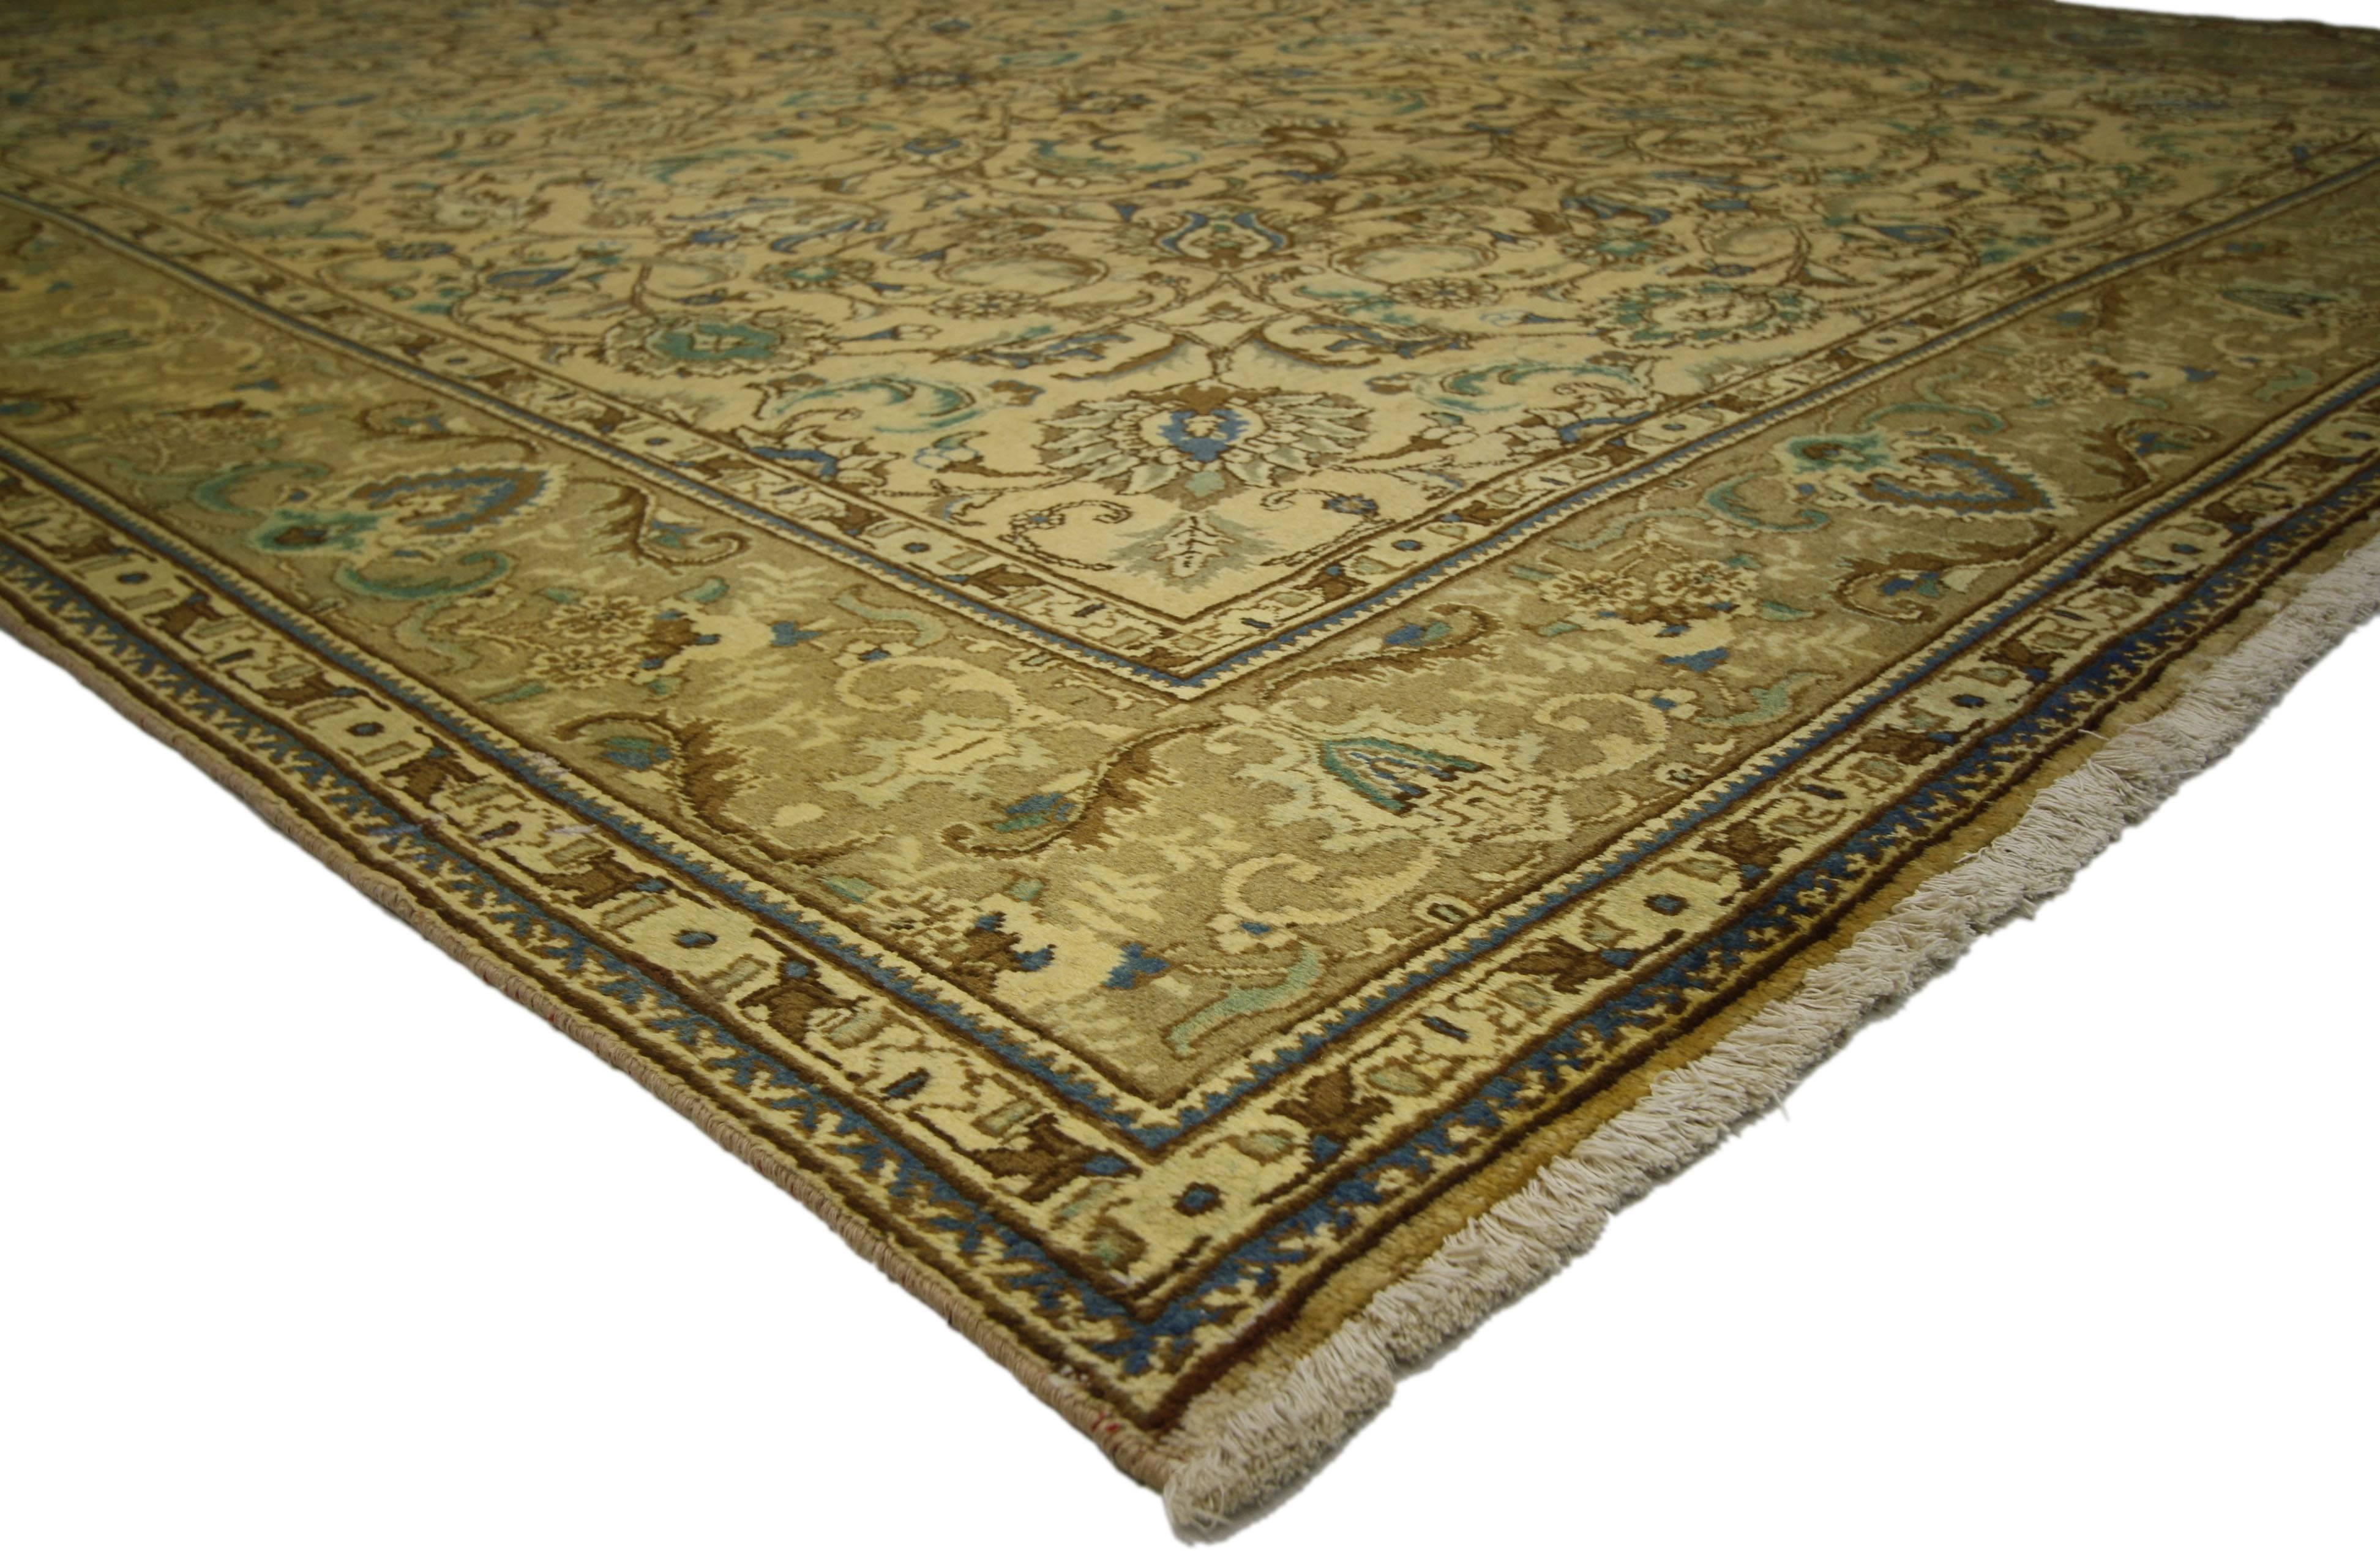 76327, vintage Persian Tabriz rug with traditional style. This hand-knotted wool vintage Persian Tabriz rug features an all-over pattern surrounded by a classic border creating a well-balanced and timeless design. This vintage Persian Tabriz rug